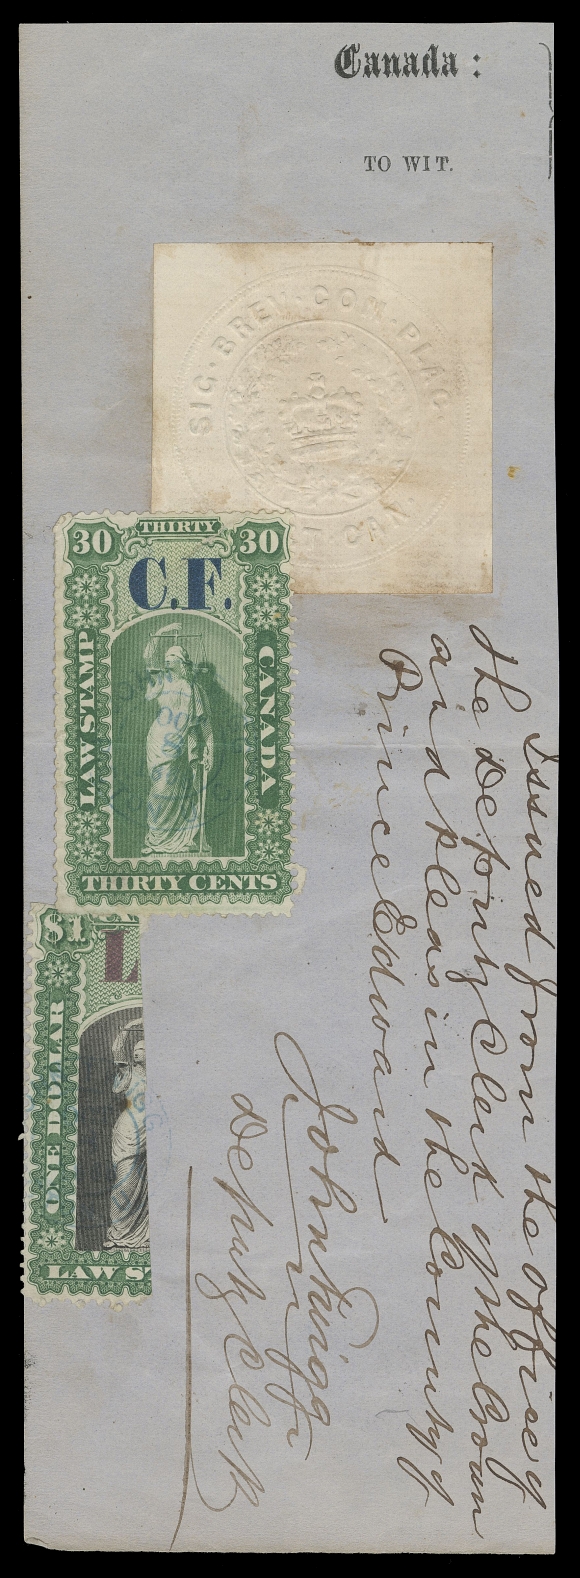 CANADA REVENUES (PROVINCIAL)  OL41b,Left vertical bisect tied by two-ring OCT 8 1868 datestamp, in combination with 30c "C.F." (horizontal crease) and albino seal white label to large fragment of document; a rare usage, Fine+